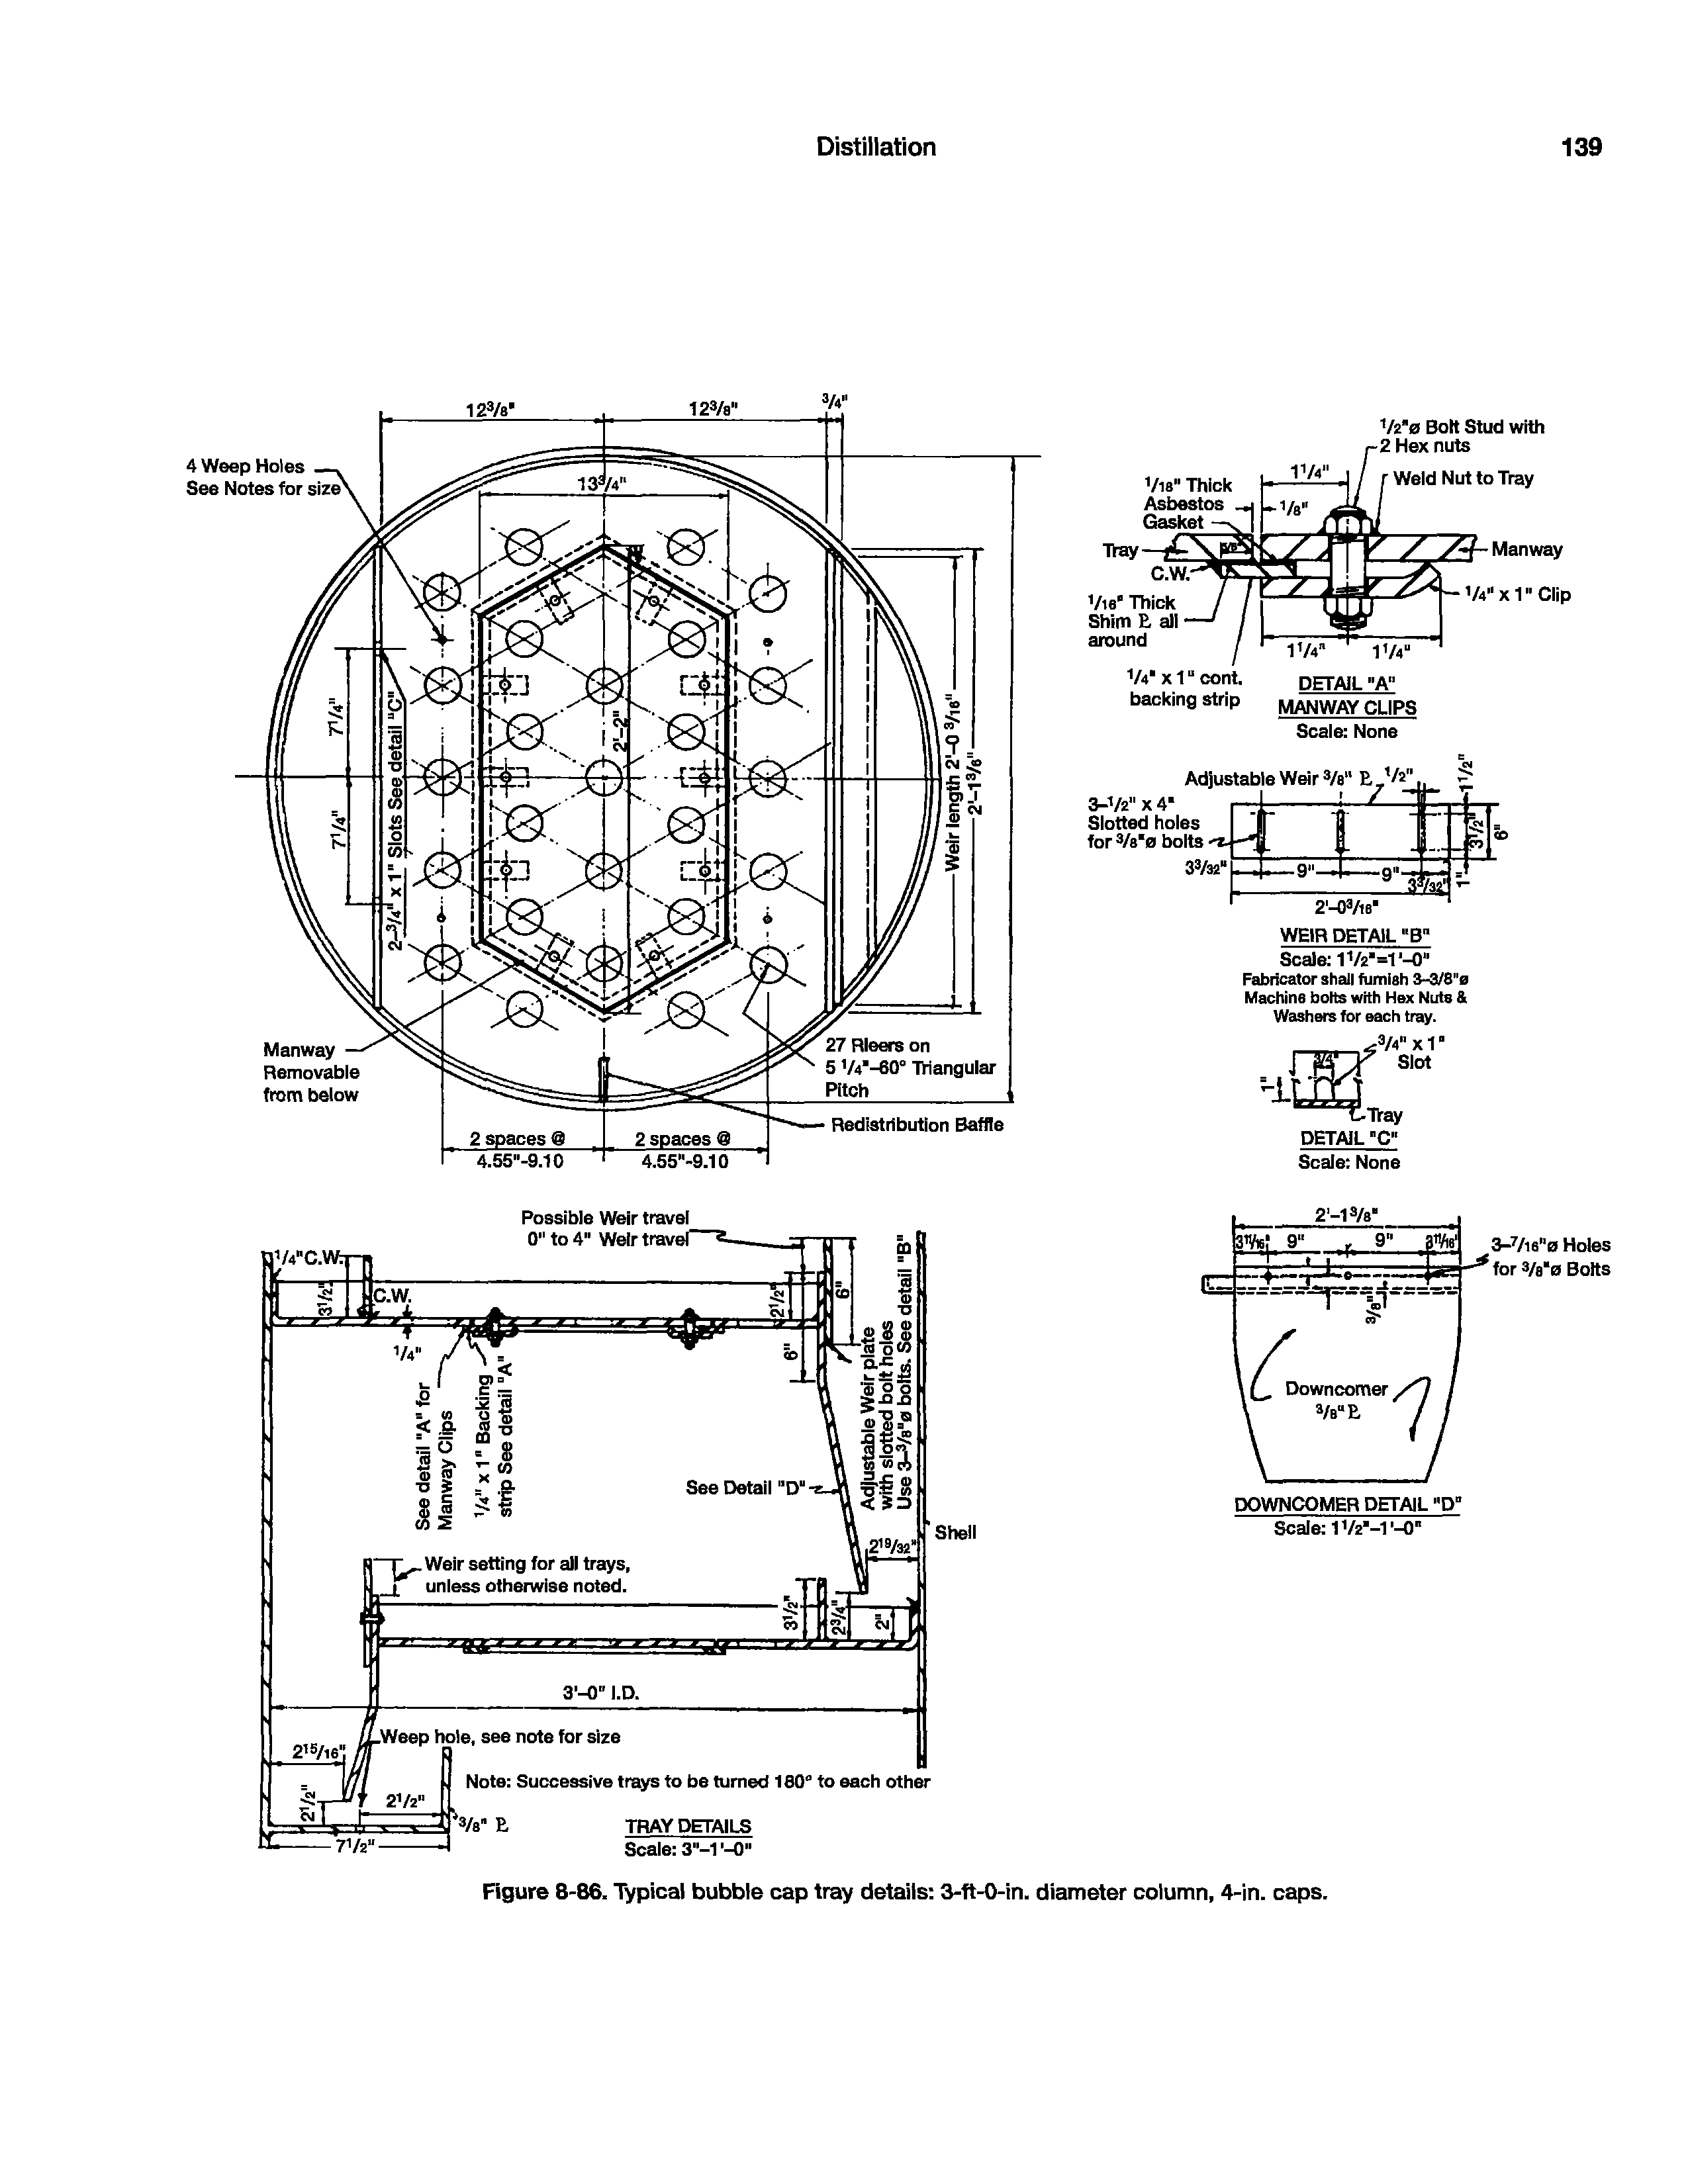 Figure 8-86. Typical bubble cap tray details 3-ft-O-in. diameter column, 4-in. caps.